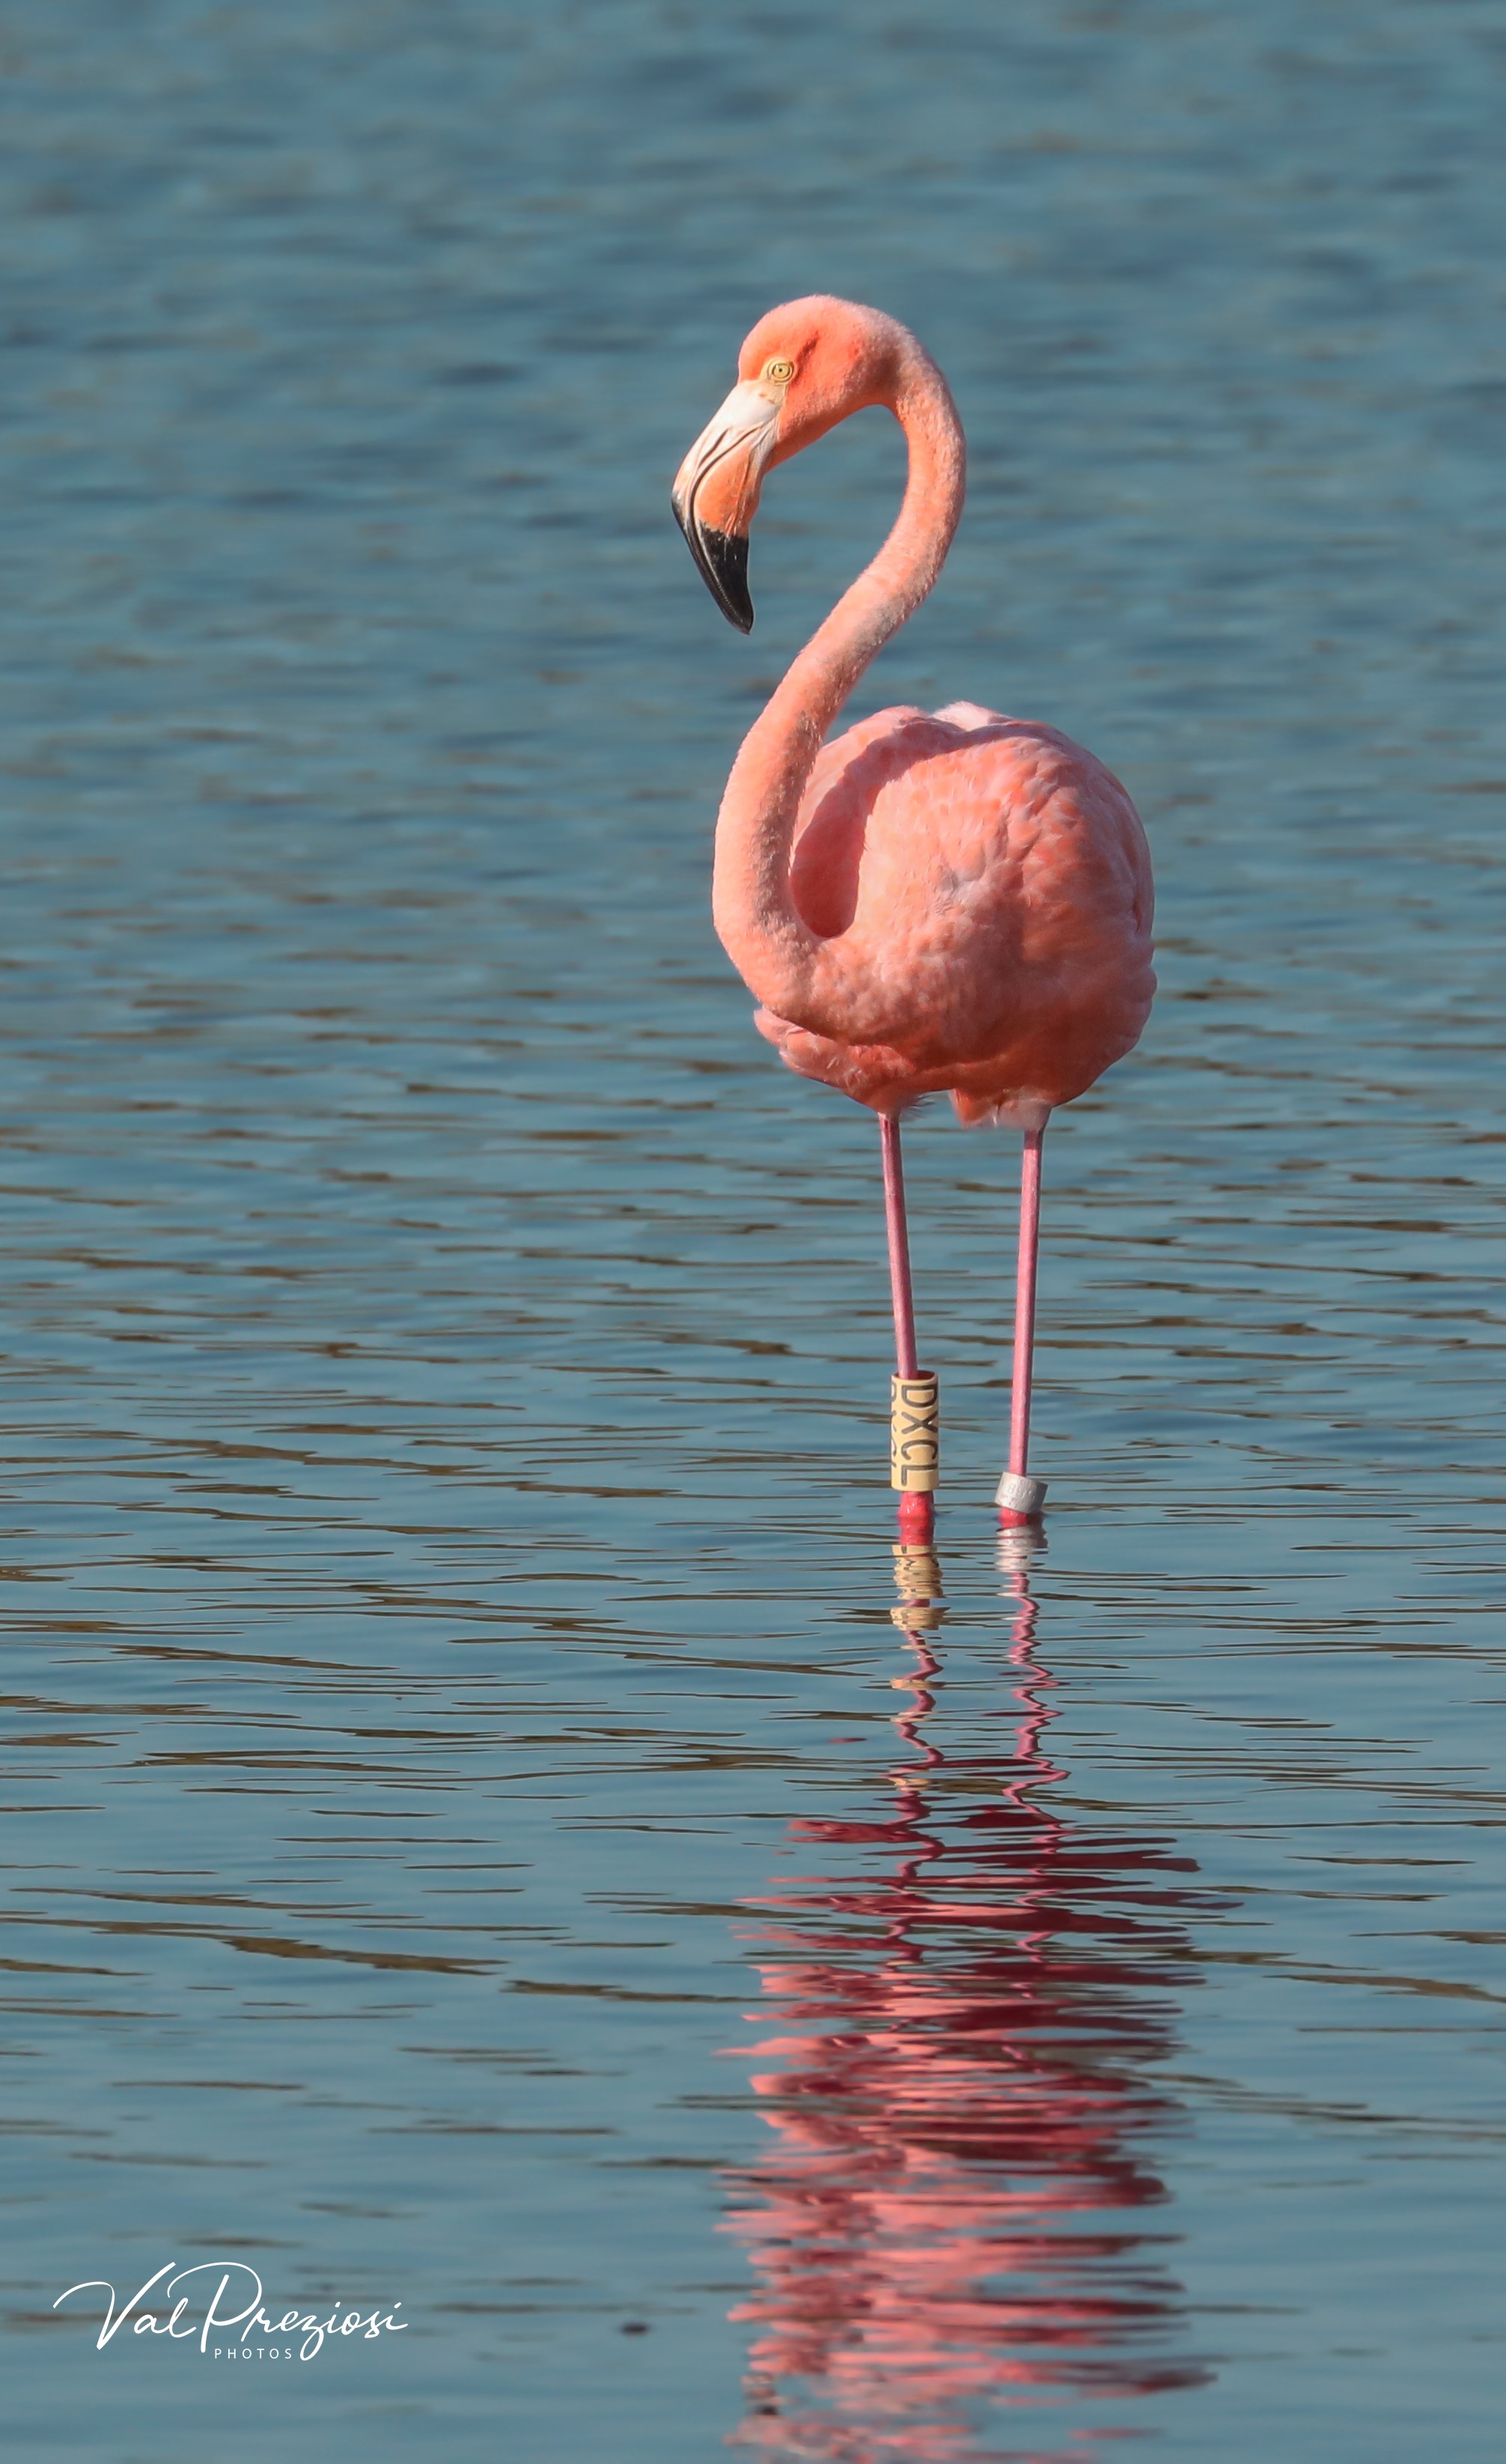 Have you seen the pink flamingos in the Florida Keys? Residents